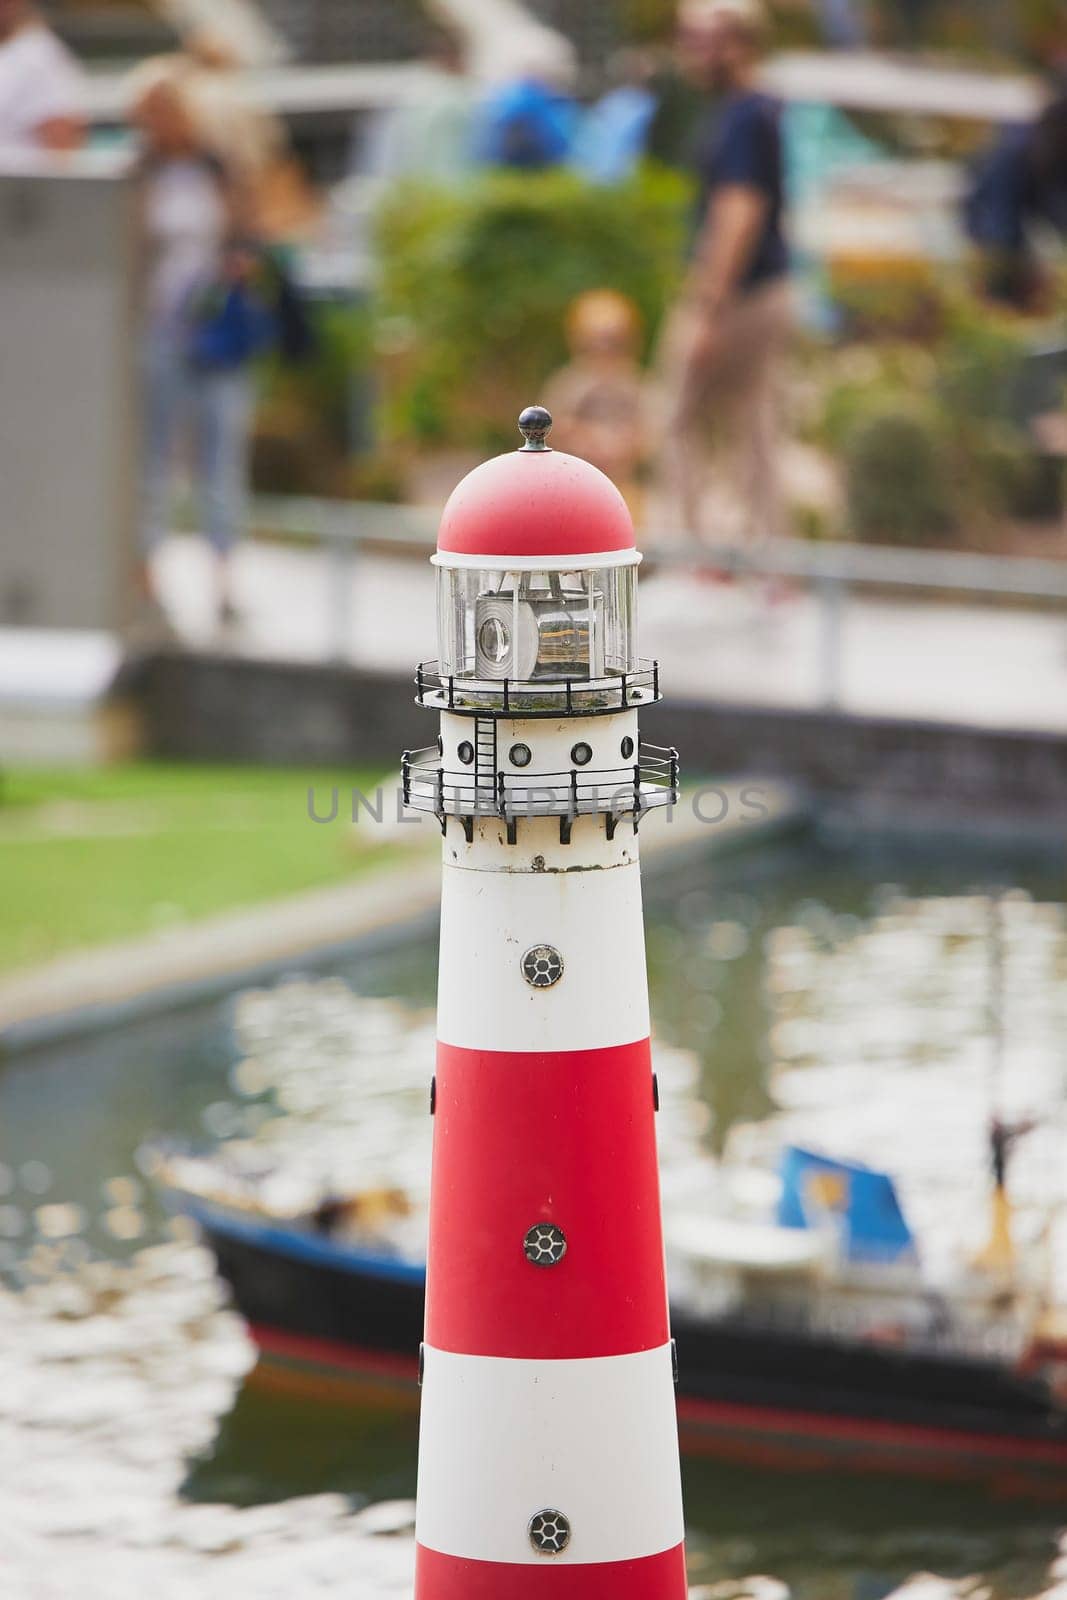 Toy lighthouse in a miniature city in the Netherlands by Viktor_Osypenko